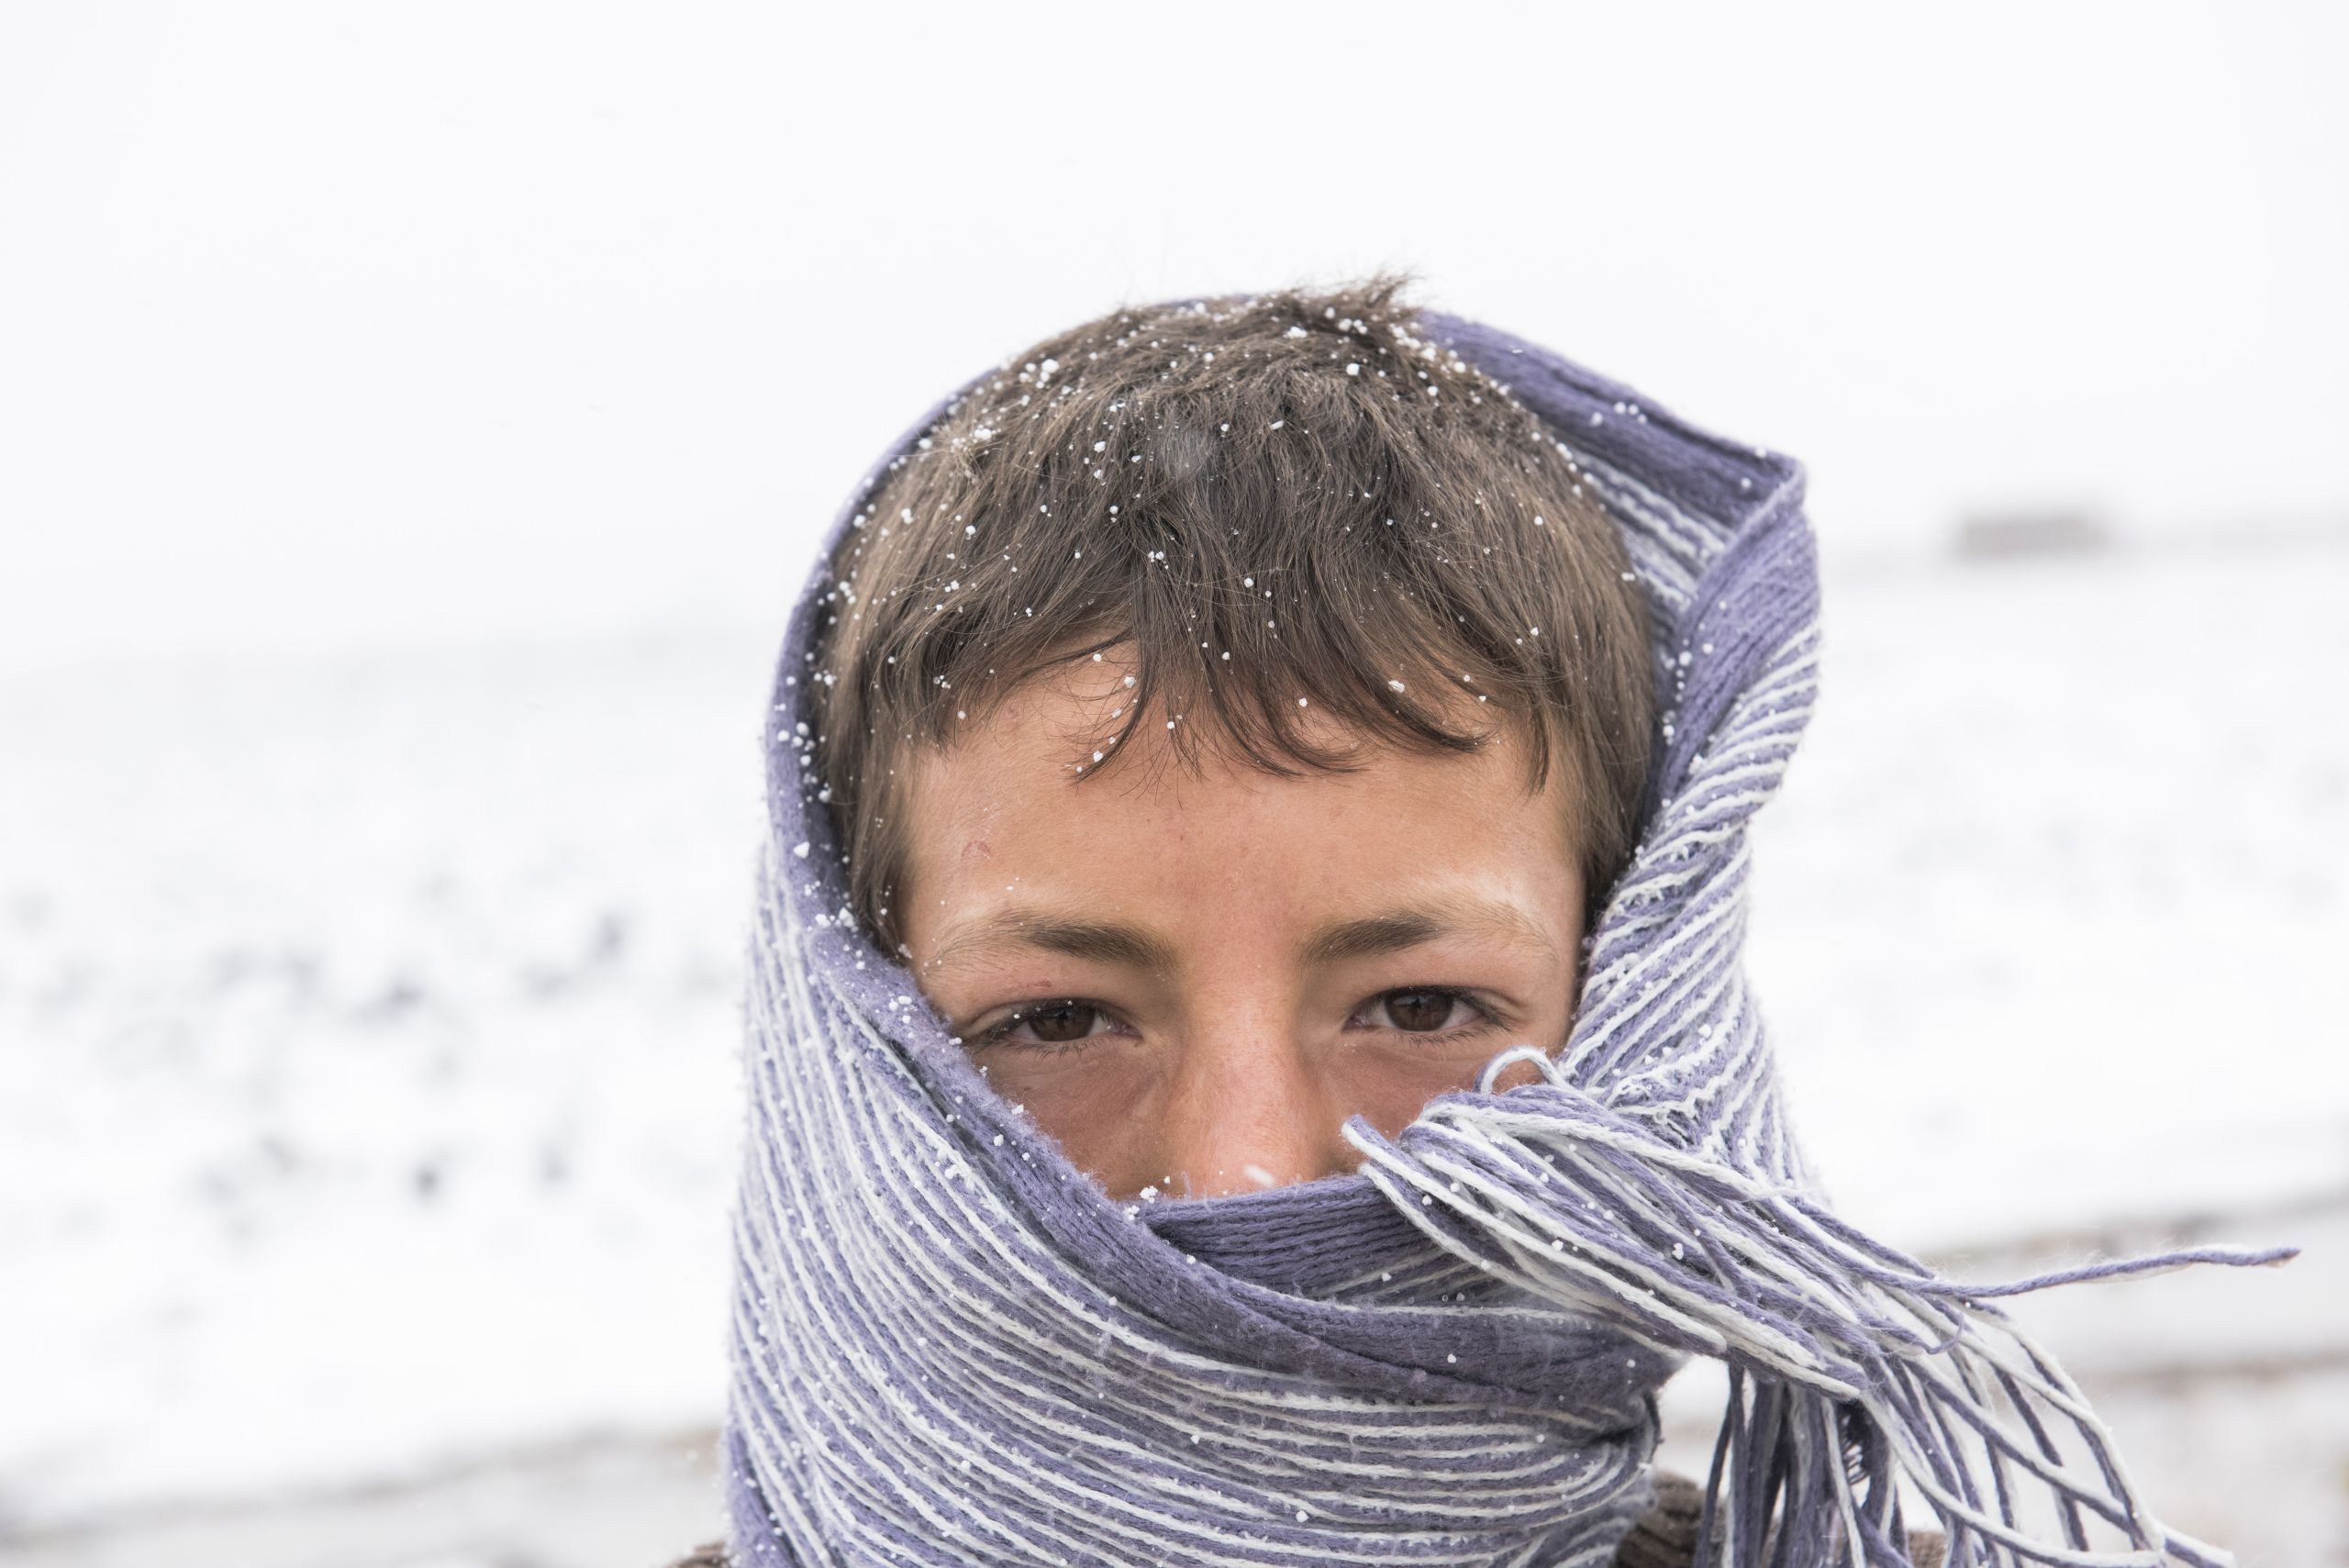 Syrian refugee boy standing in the snow